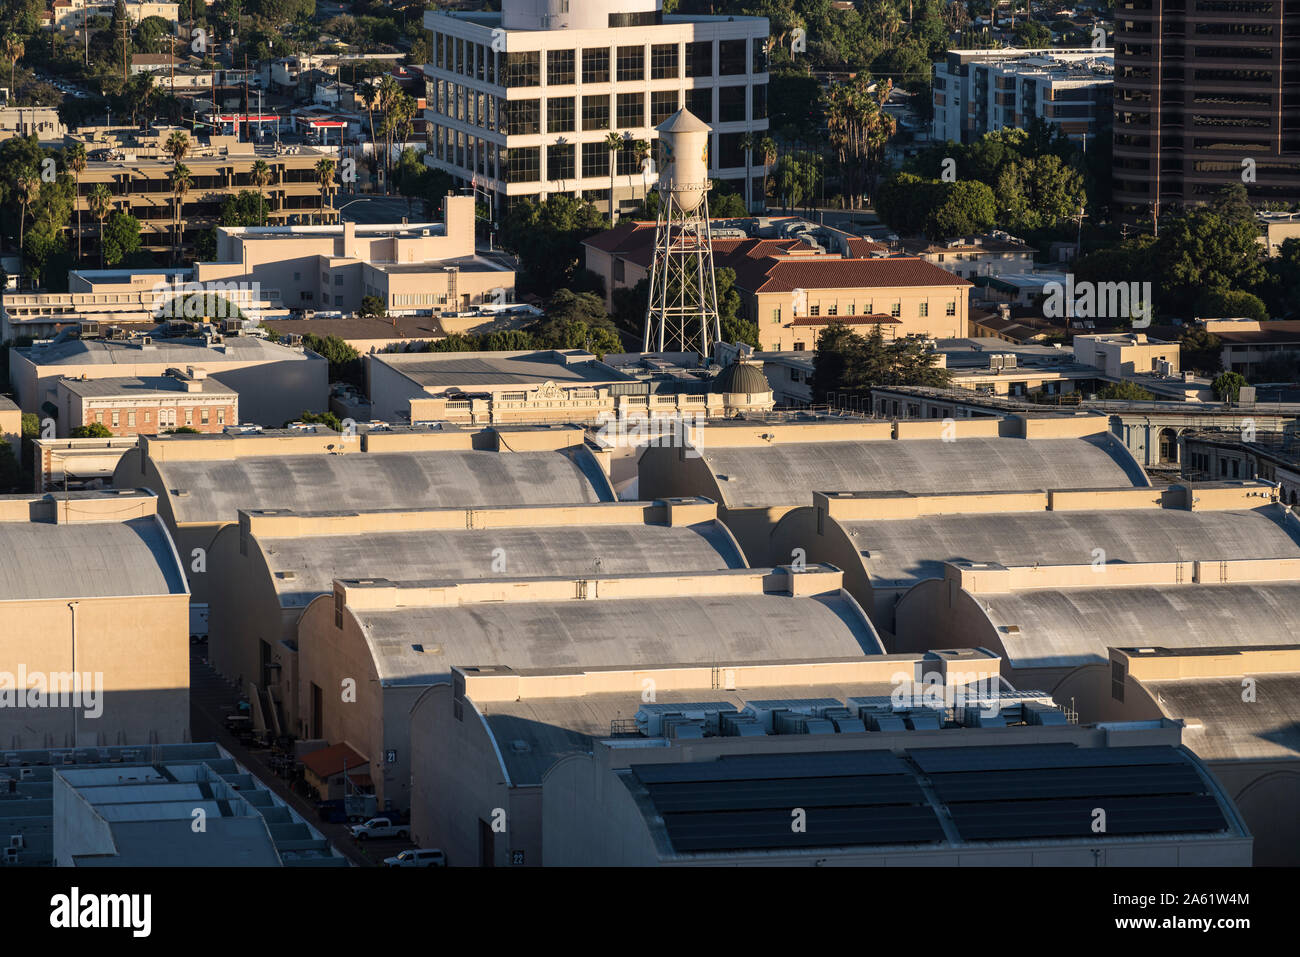 Burbank, California, USA - October 20, 2019:  Morning view of historic sound stages with curved rooftops at the Warner Brothers studio lot near Los An Stock Photo